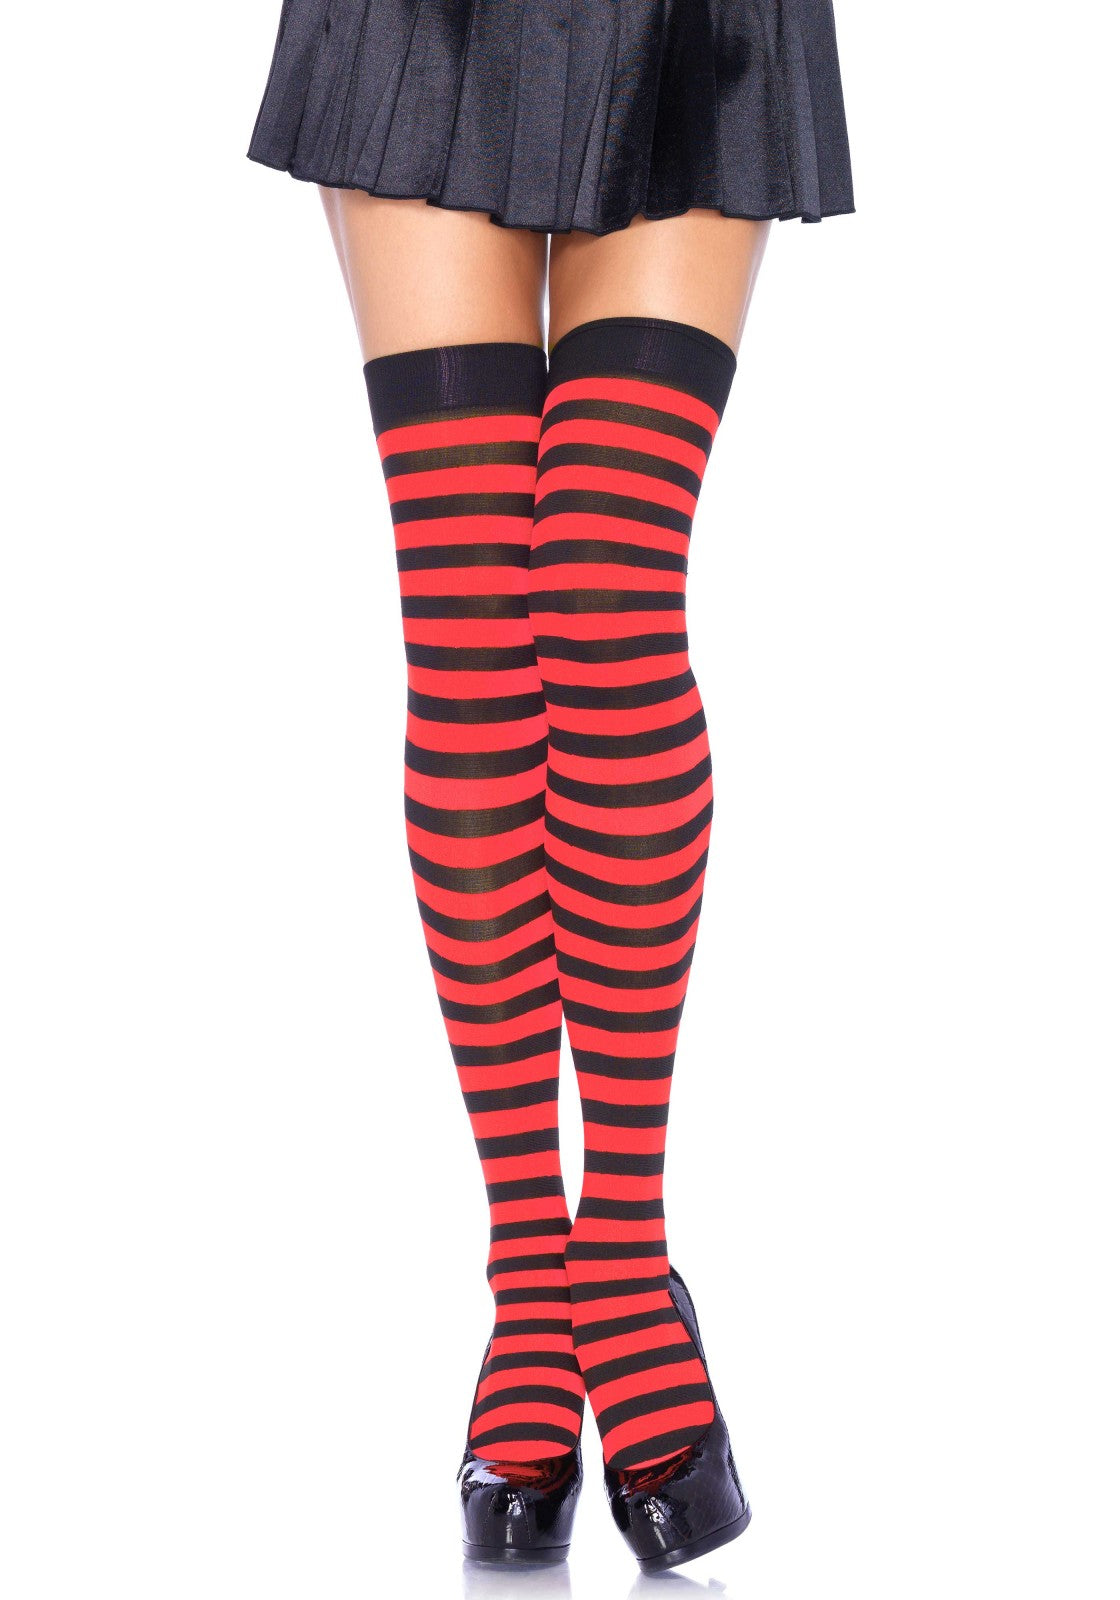 Leg Avenue 6005 Striped nylon thigh highs - red and black horizontal stripe over the knee socks, can be worn as stockings